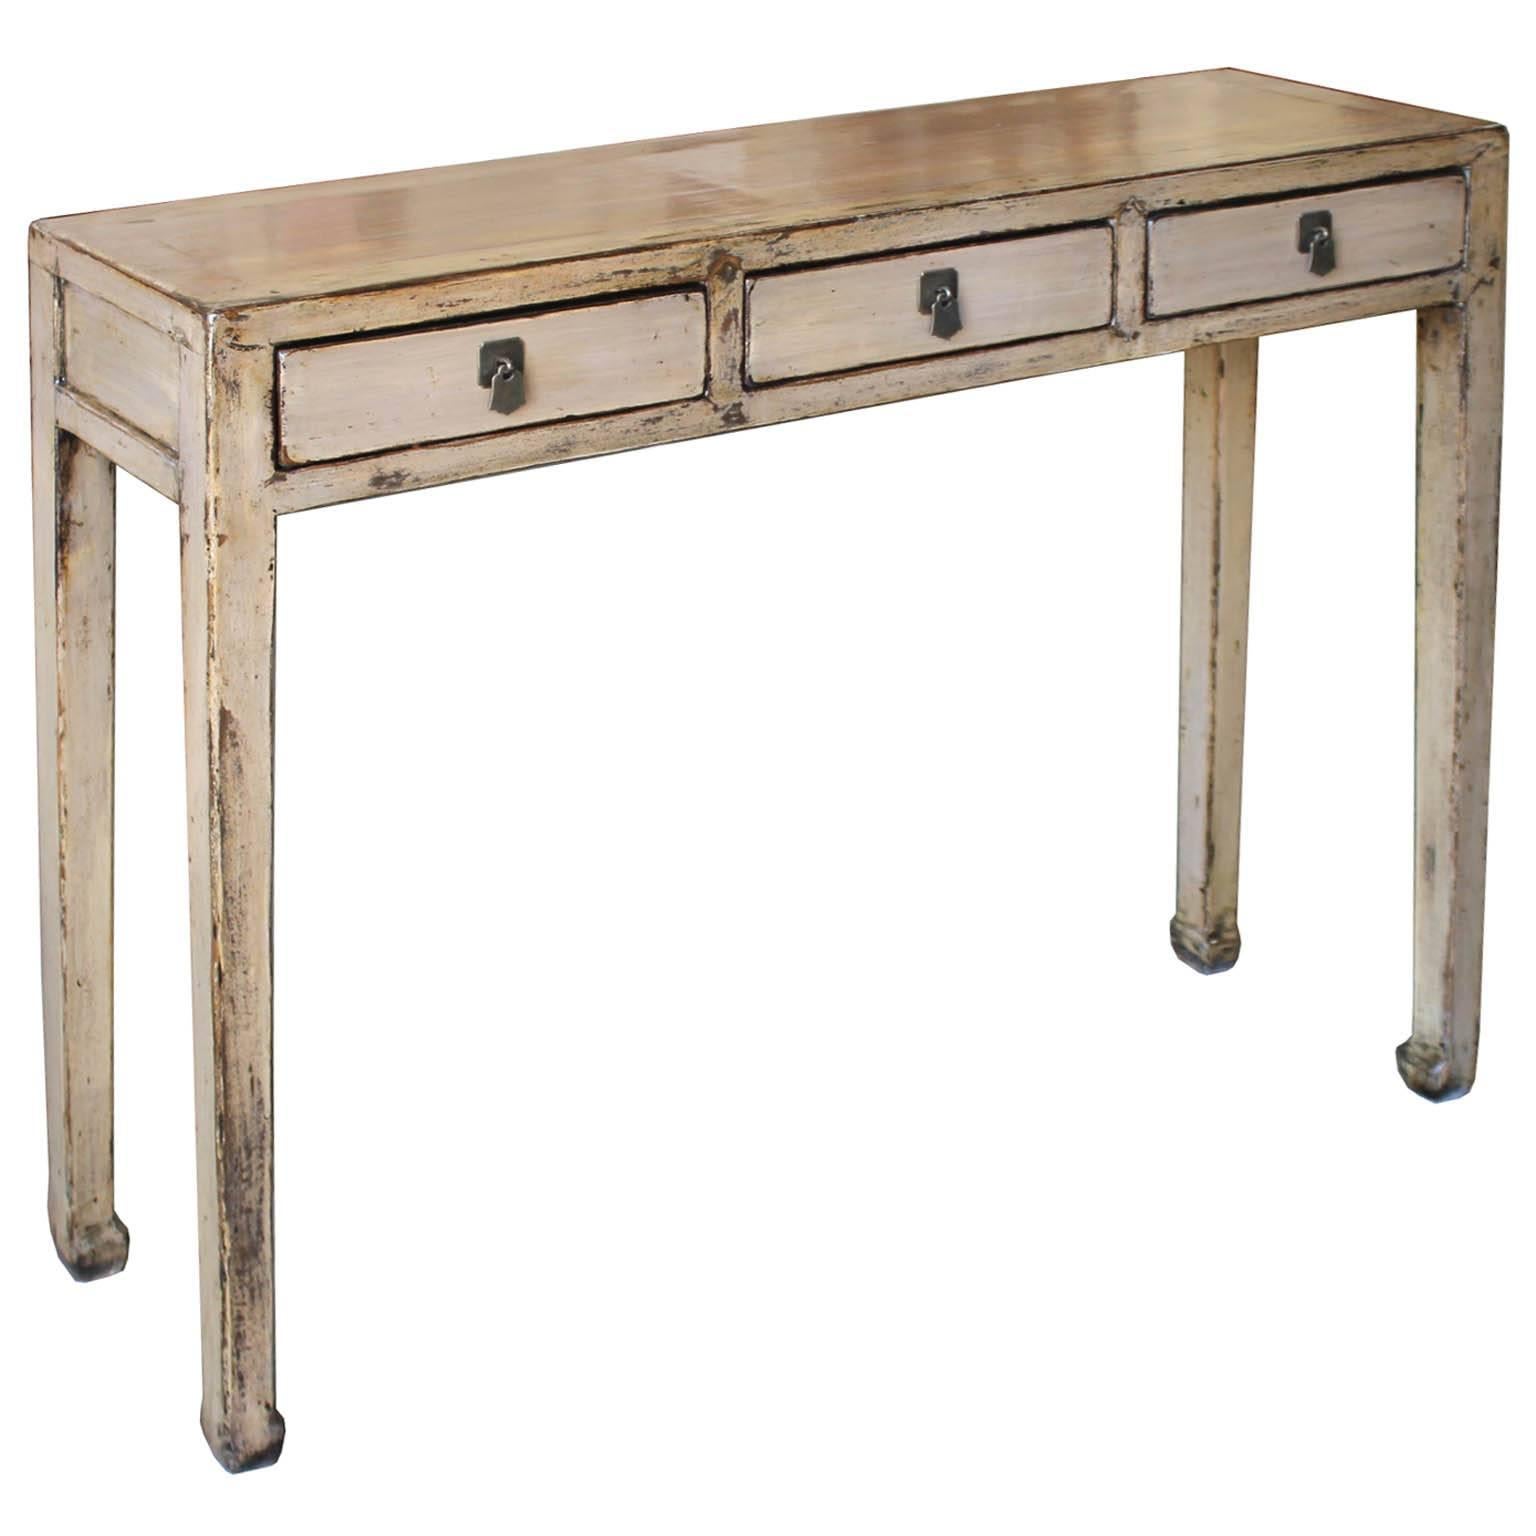 Contemporary parchment/gray lacquer console table with clean lines can be placed at the end of a hallway or in an entryway.